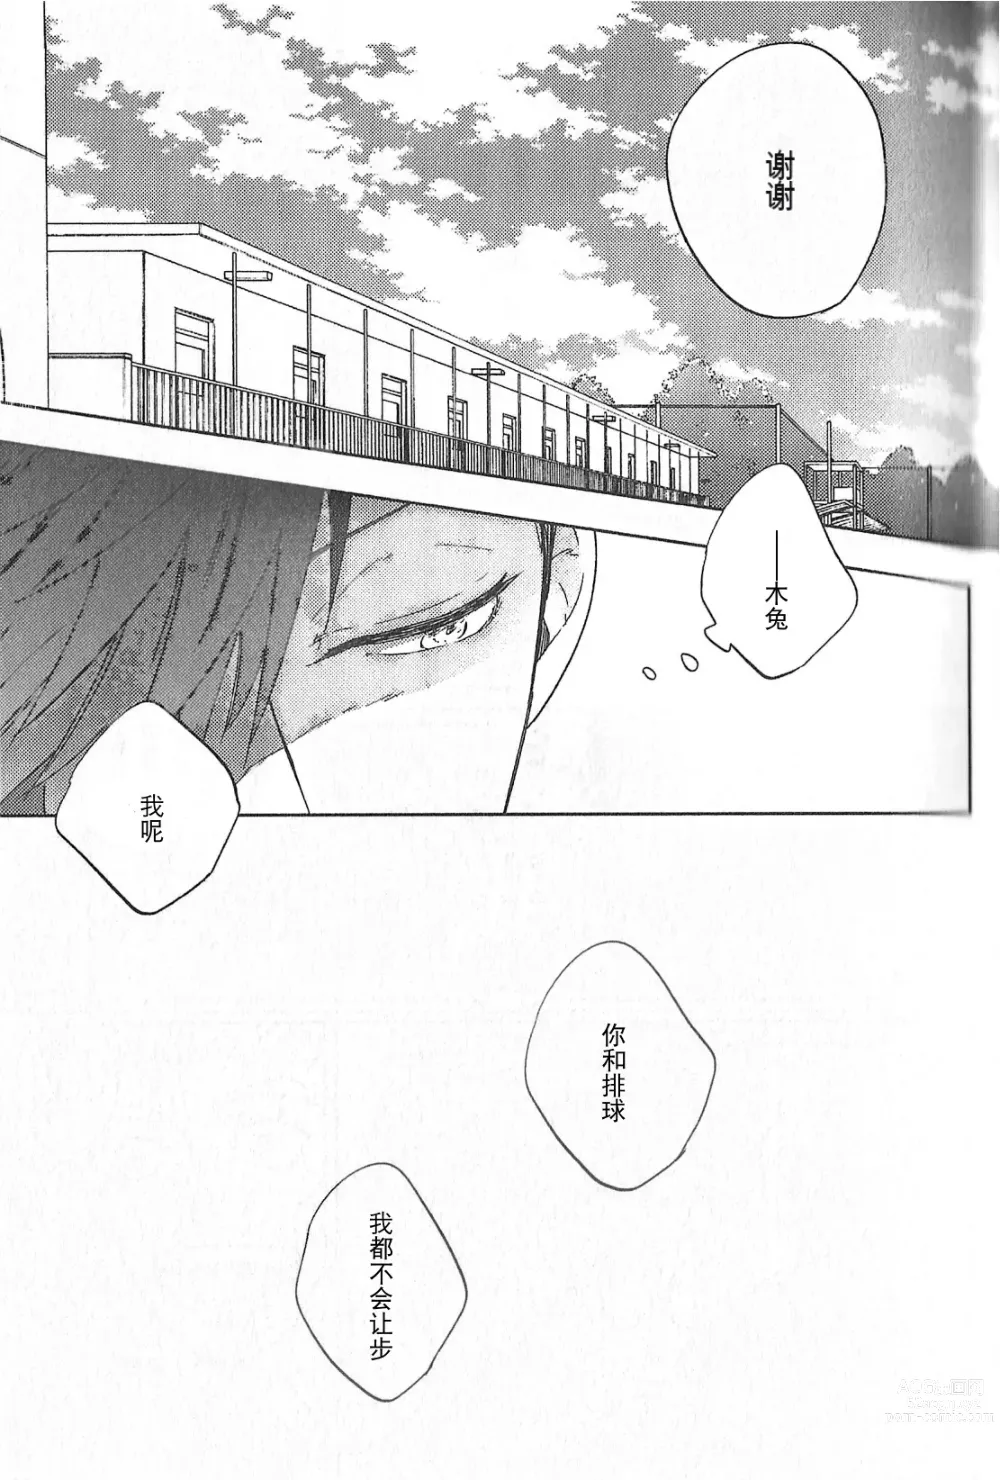 Page 22 of doujinshi 极境的野兽 前篇